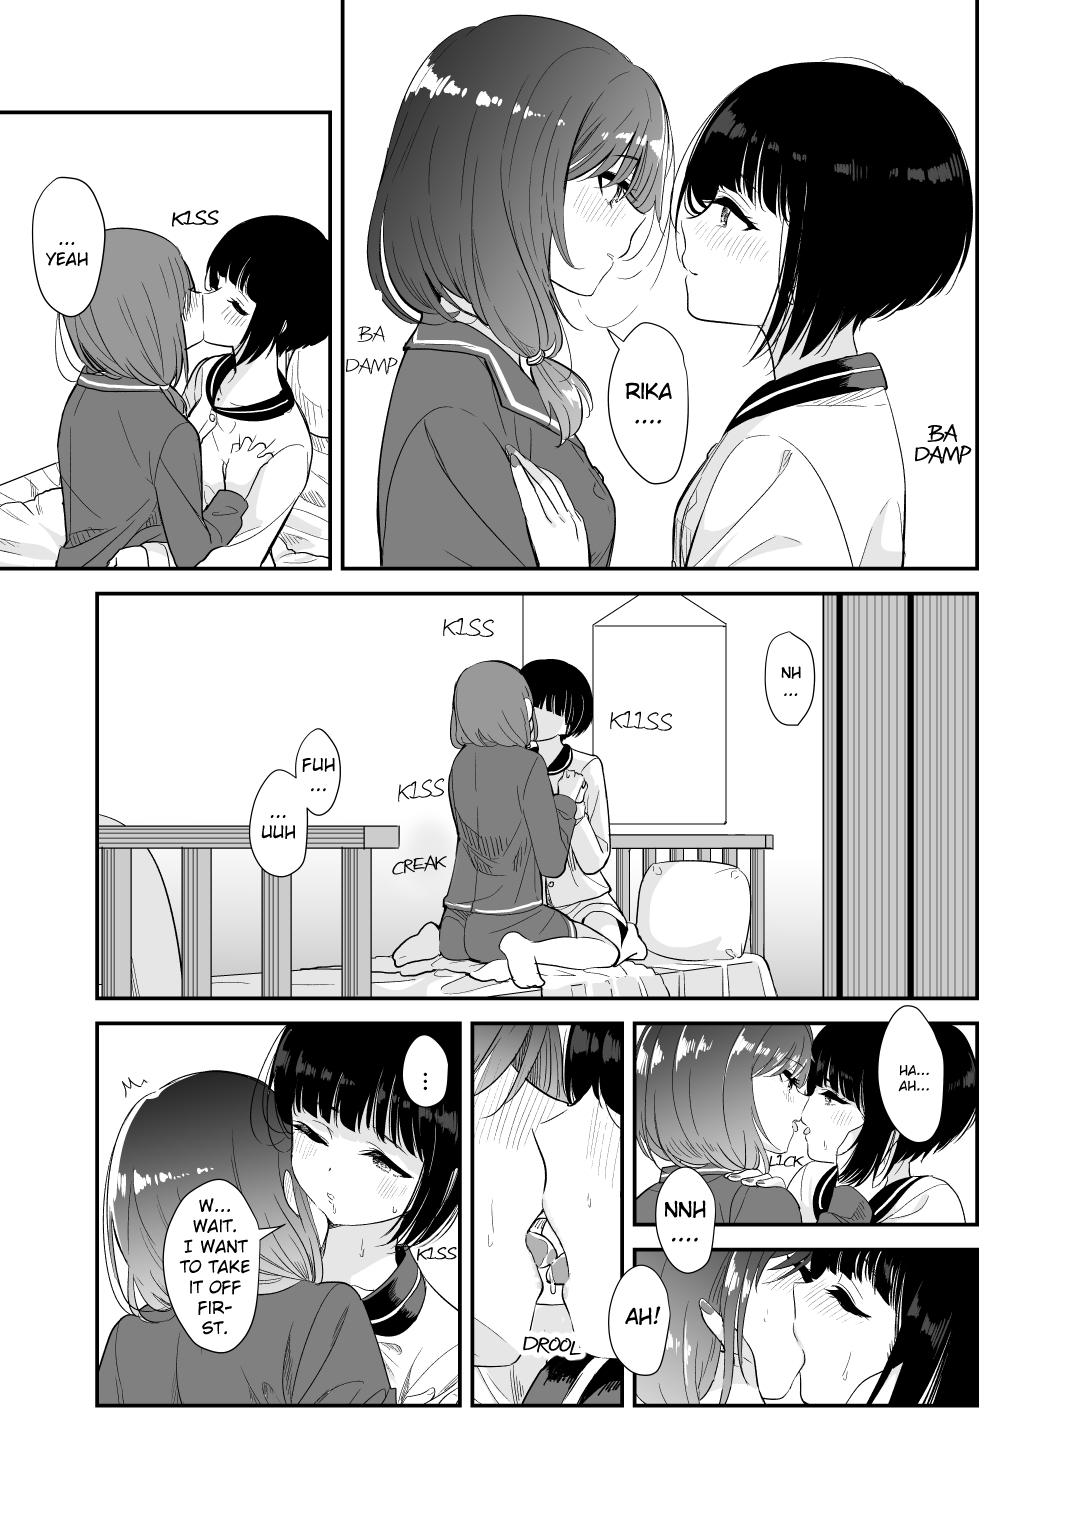 People Having Sex Kyou Oya, Inai kara | My Parents Aren't Home Today, So... Perra - Page 11